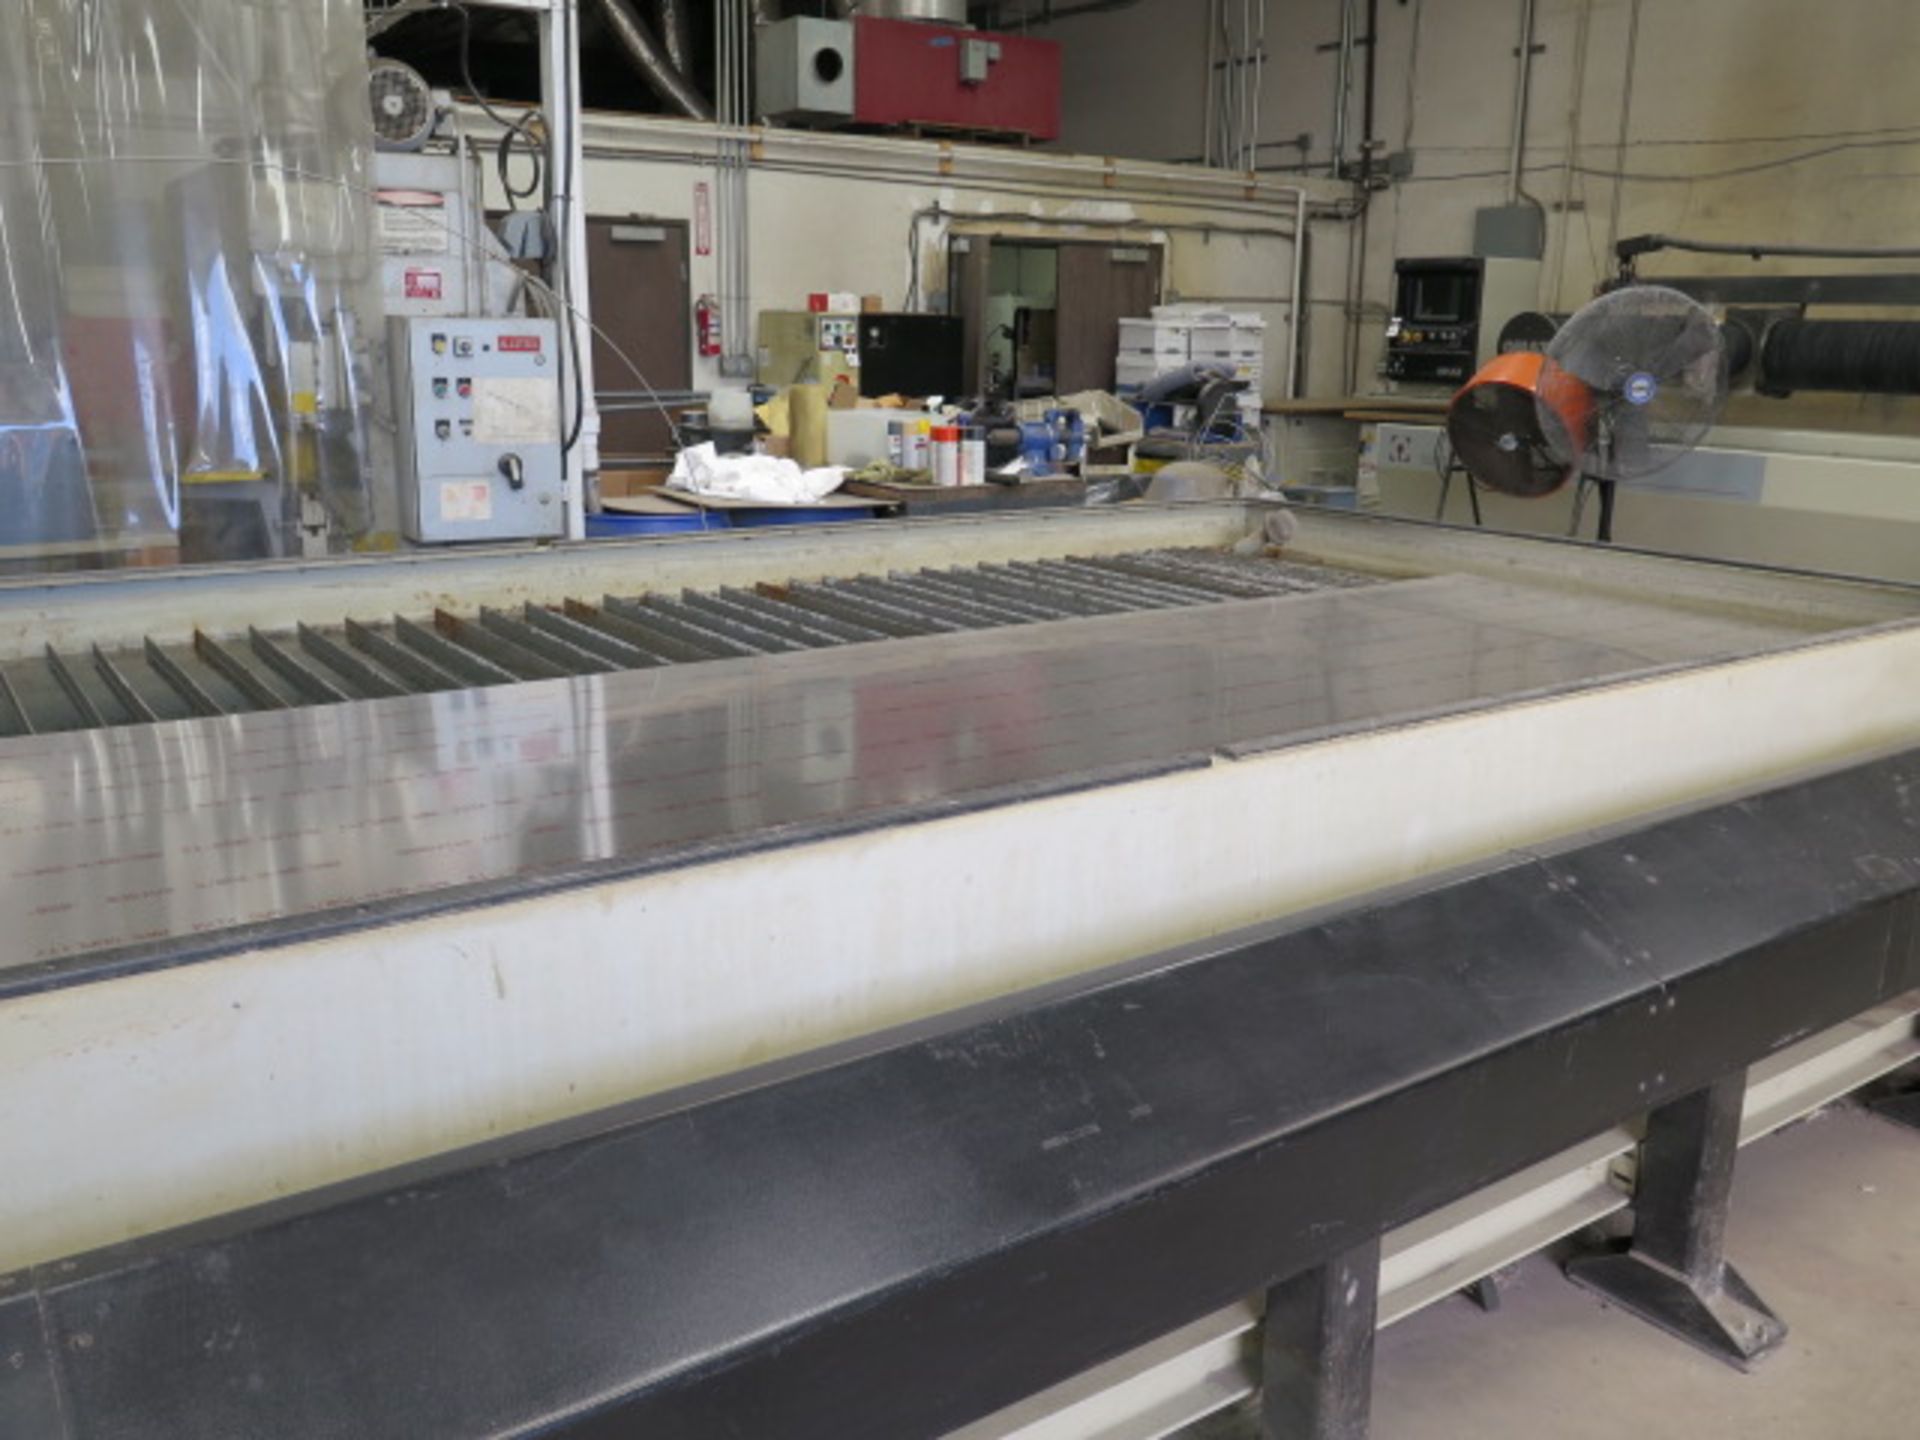 Omax “Fabricator” 80” x 160” CNC WaterJet Machine s/n G511506 w/ Omax MAKE Precision, SOLD AS IS - Image 4 of 16